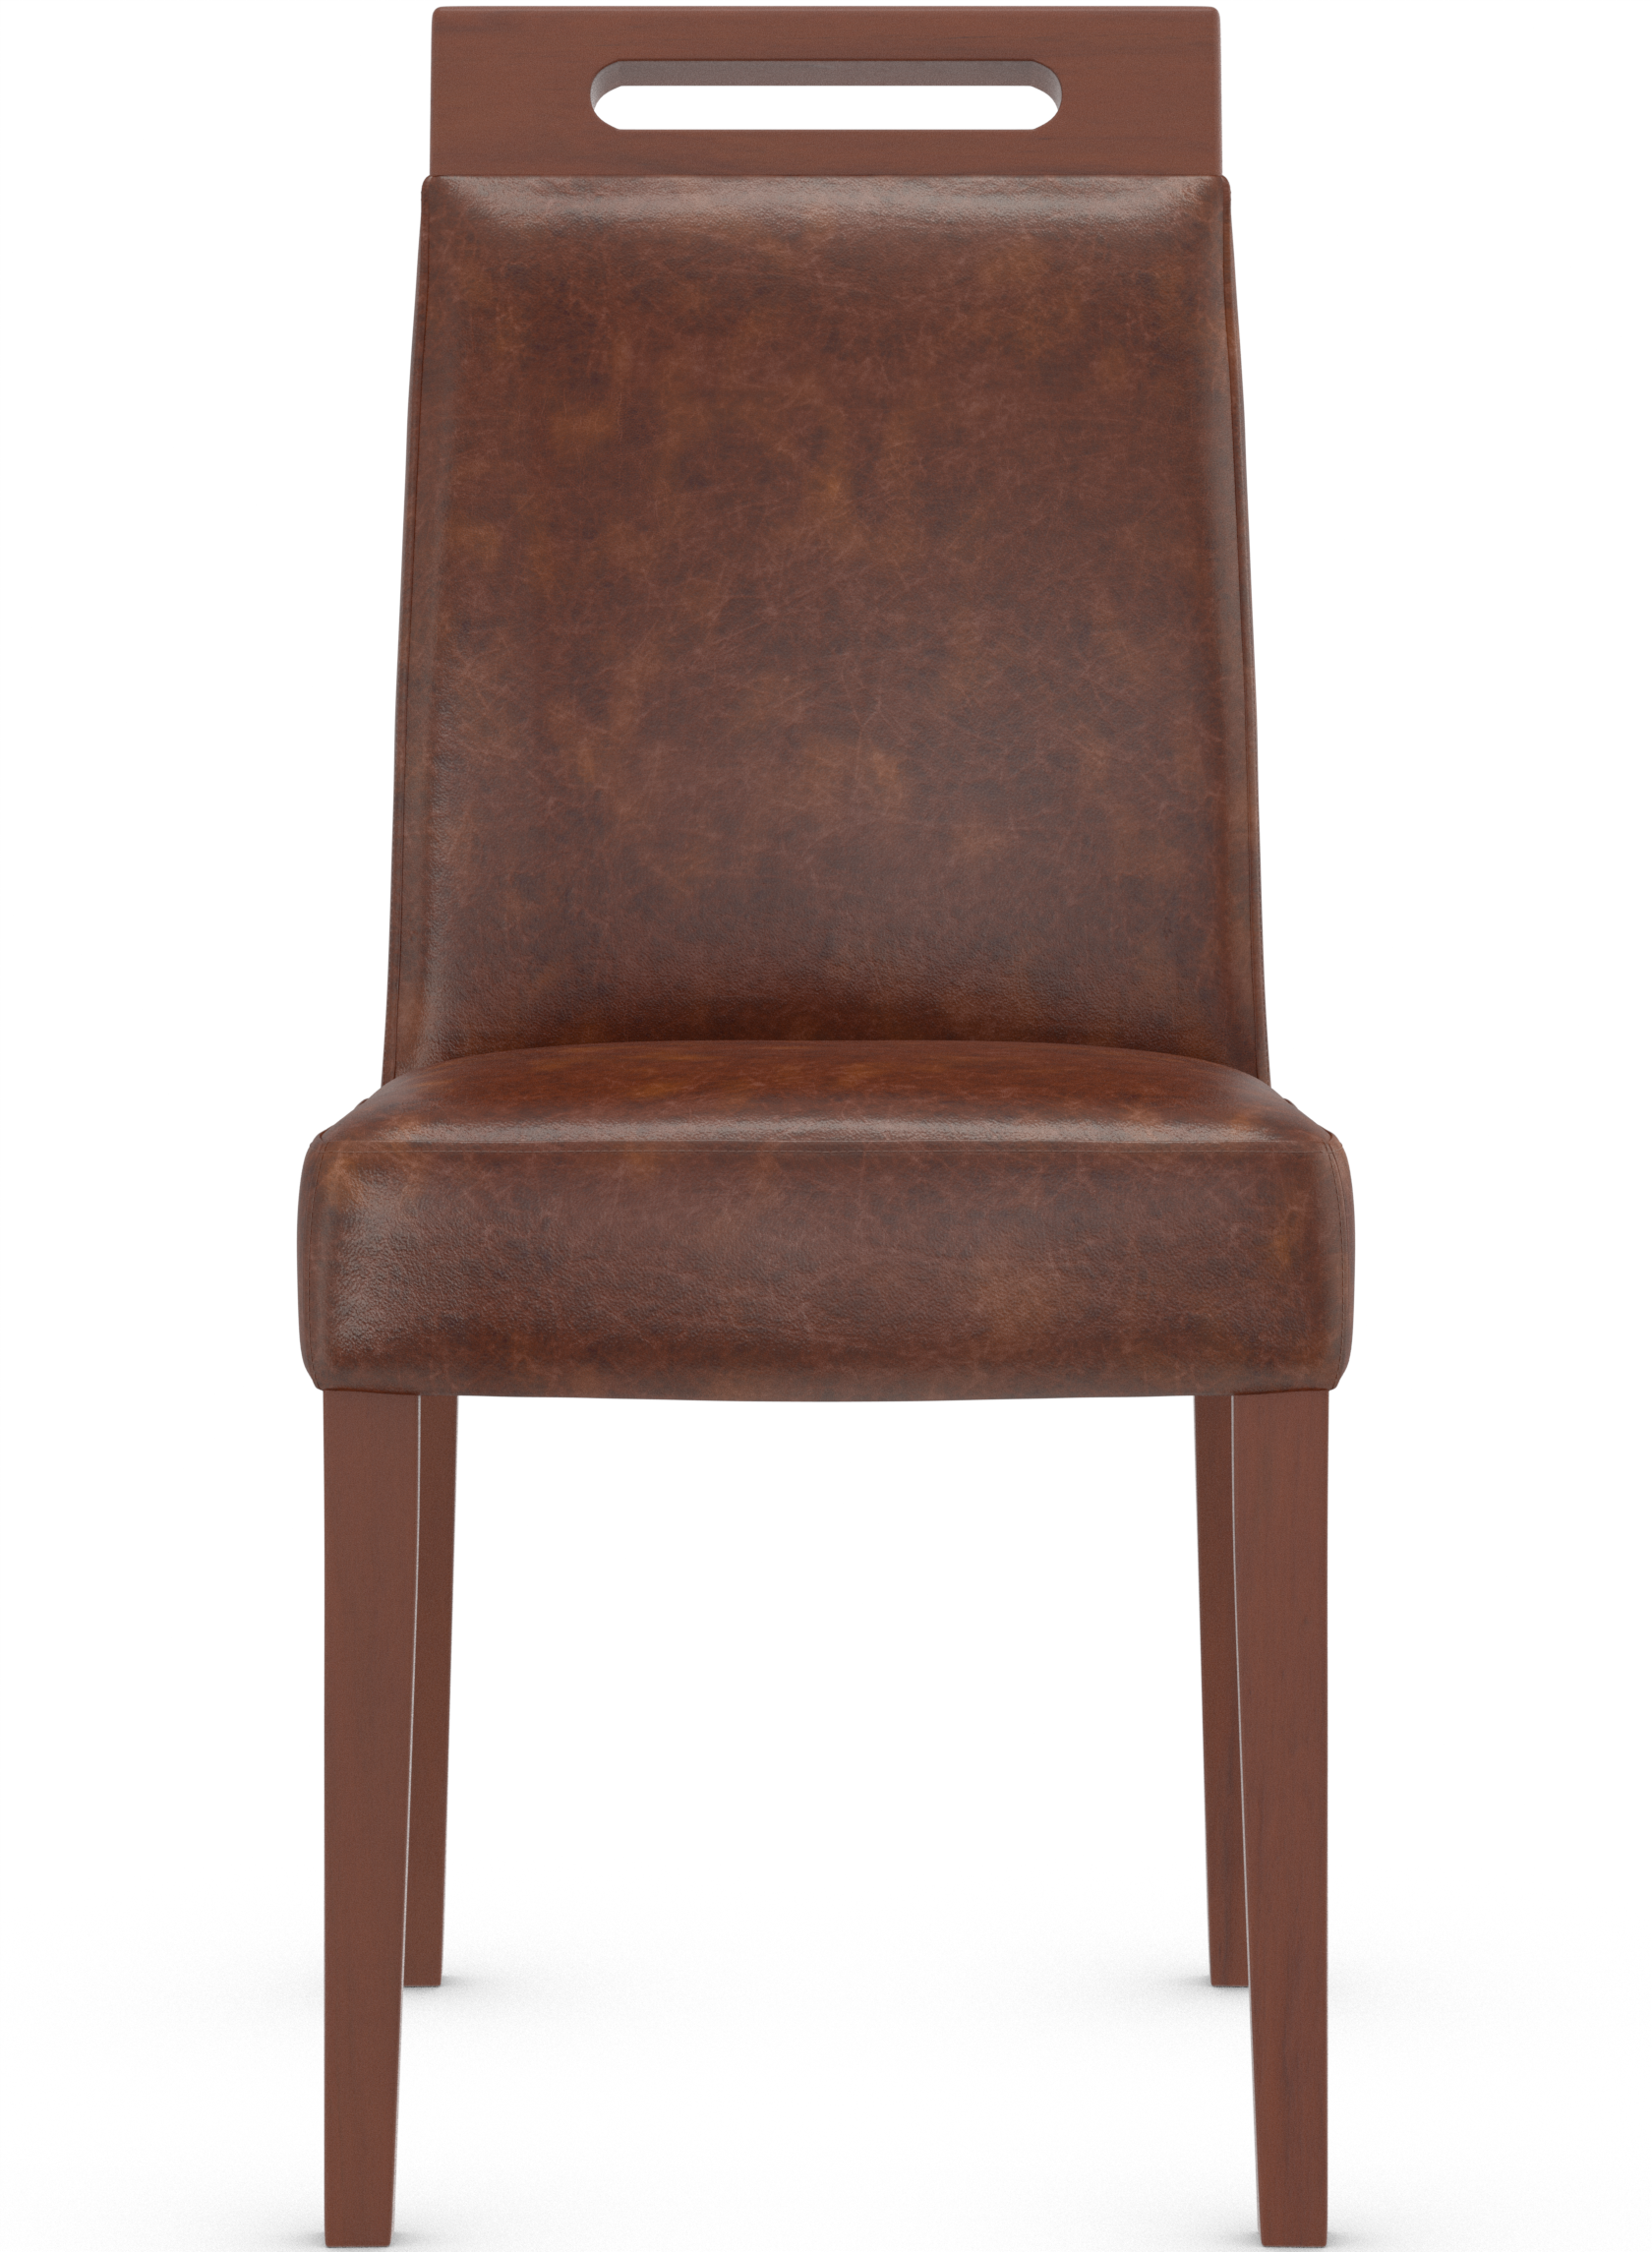 Modena Antique Black Dining Chair Fabric